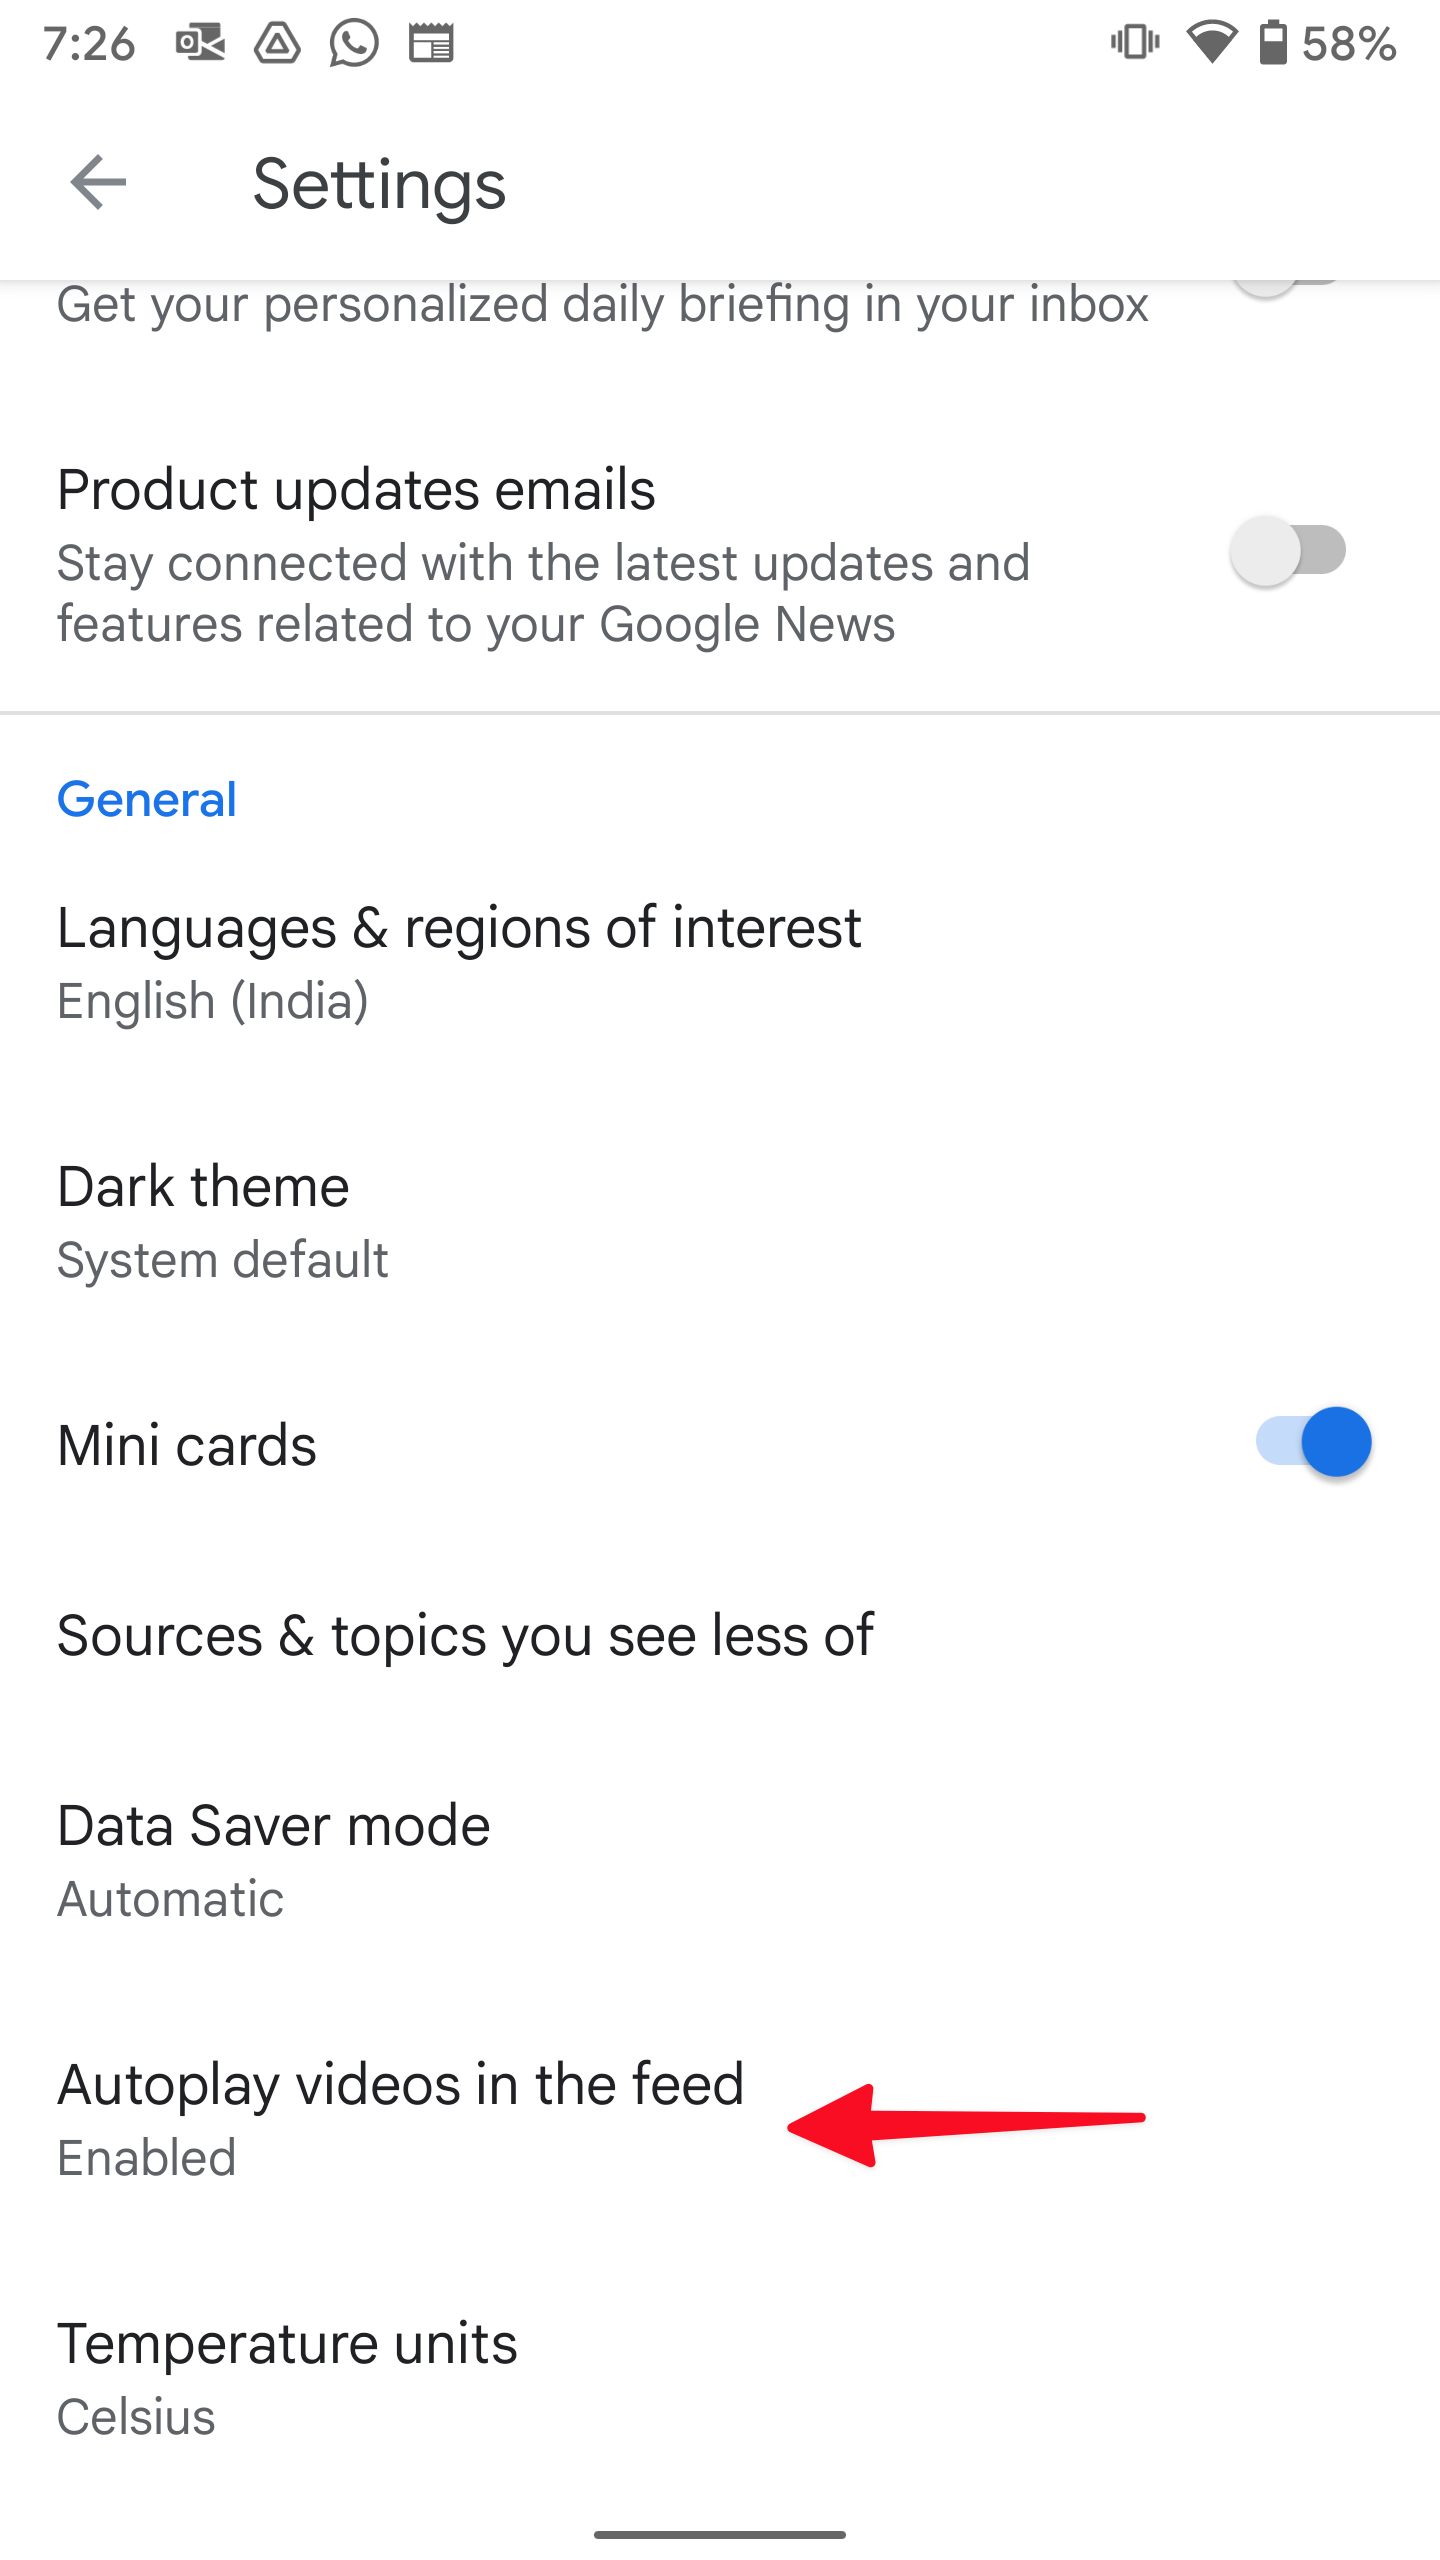 open autoplay videos in google news